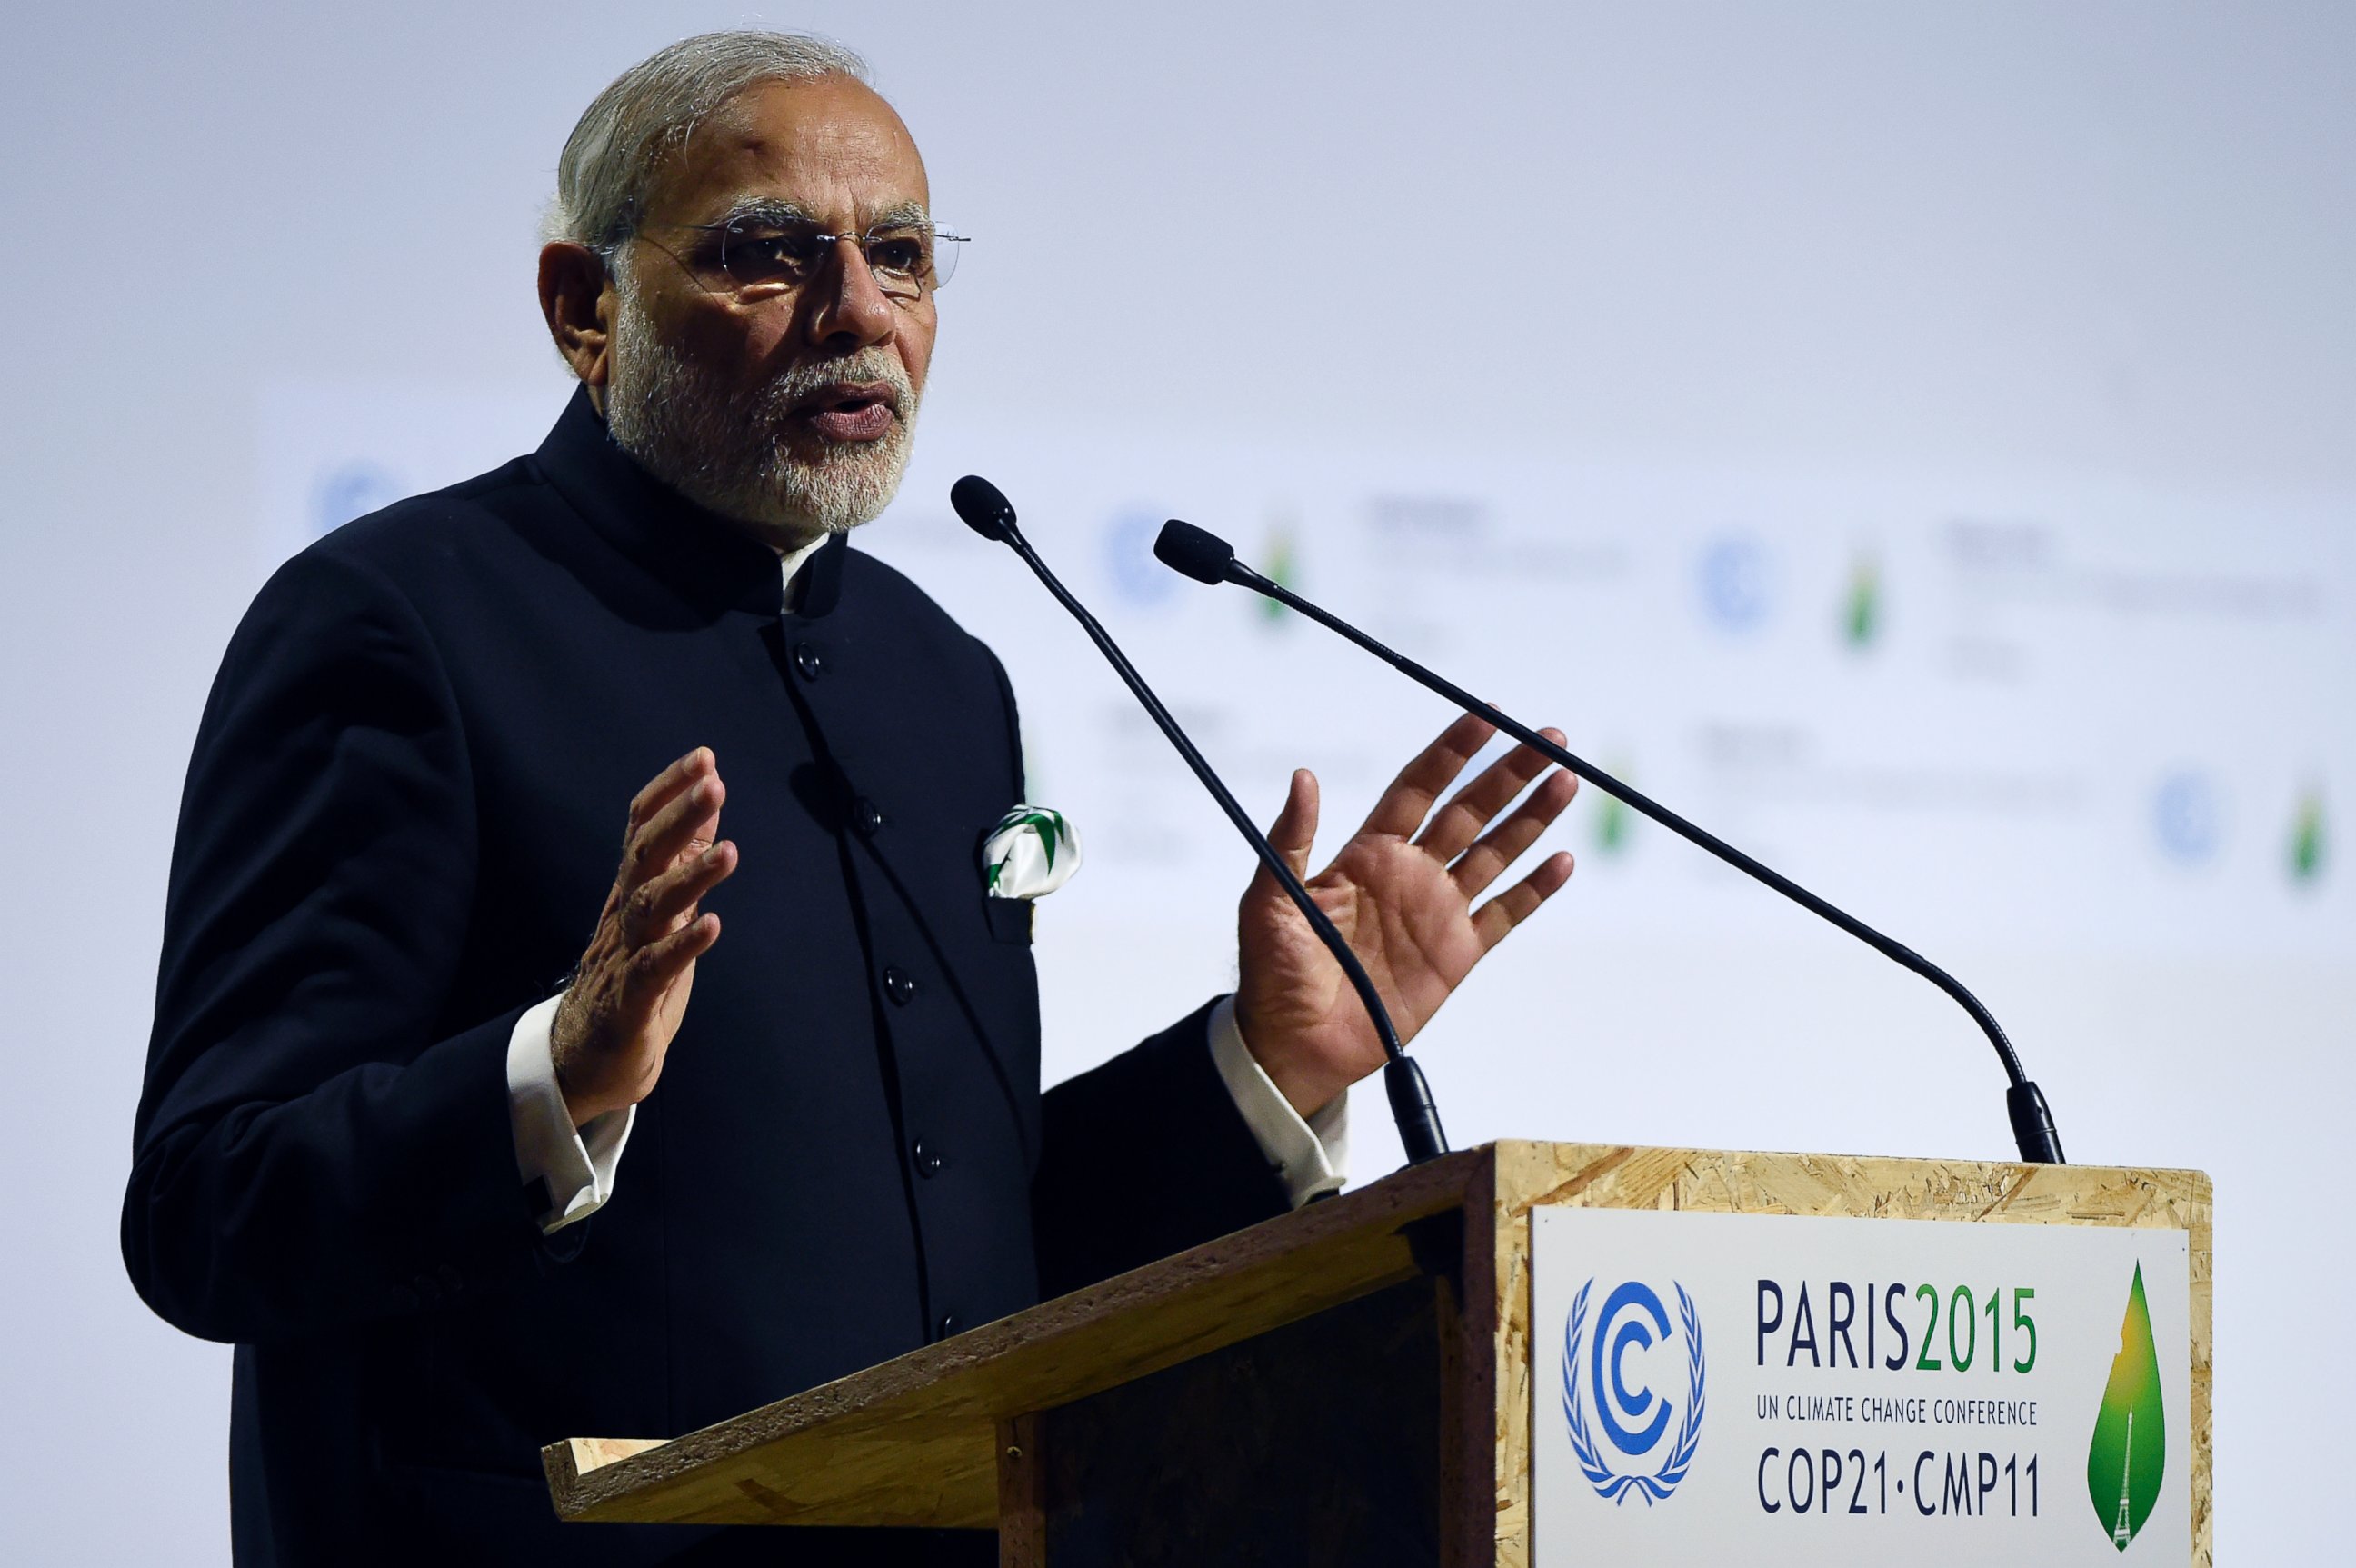 PHOTO: Indian Prime Minister Narendra Modi delivers a speech during the opening day of the World Climate Change Conference 2015 (COP21), on Nov. 30, 2015, at Le Bourget, on the outskirts of the French capital Paris.